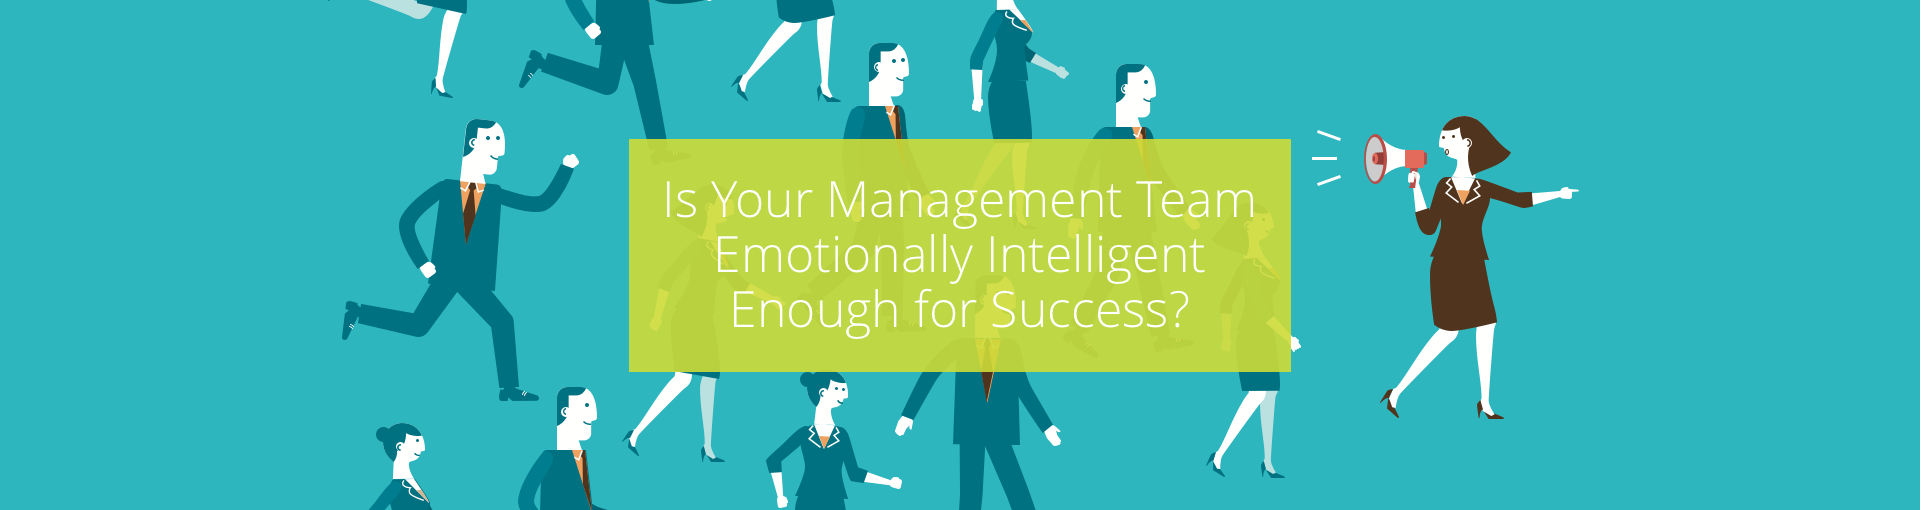 Is Your Management Team Emotionally Intelligent Enough for Success? Featured Image